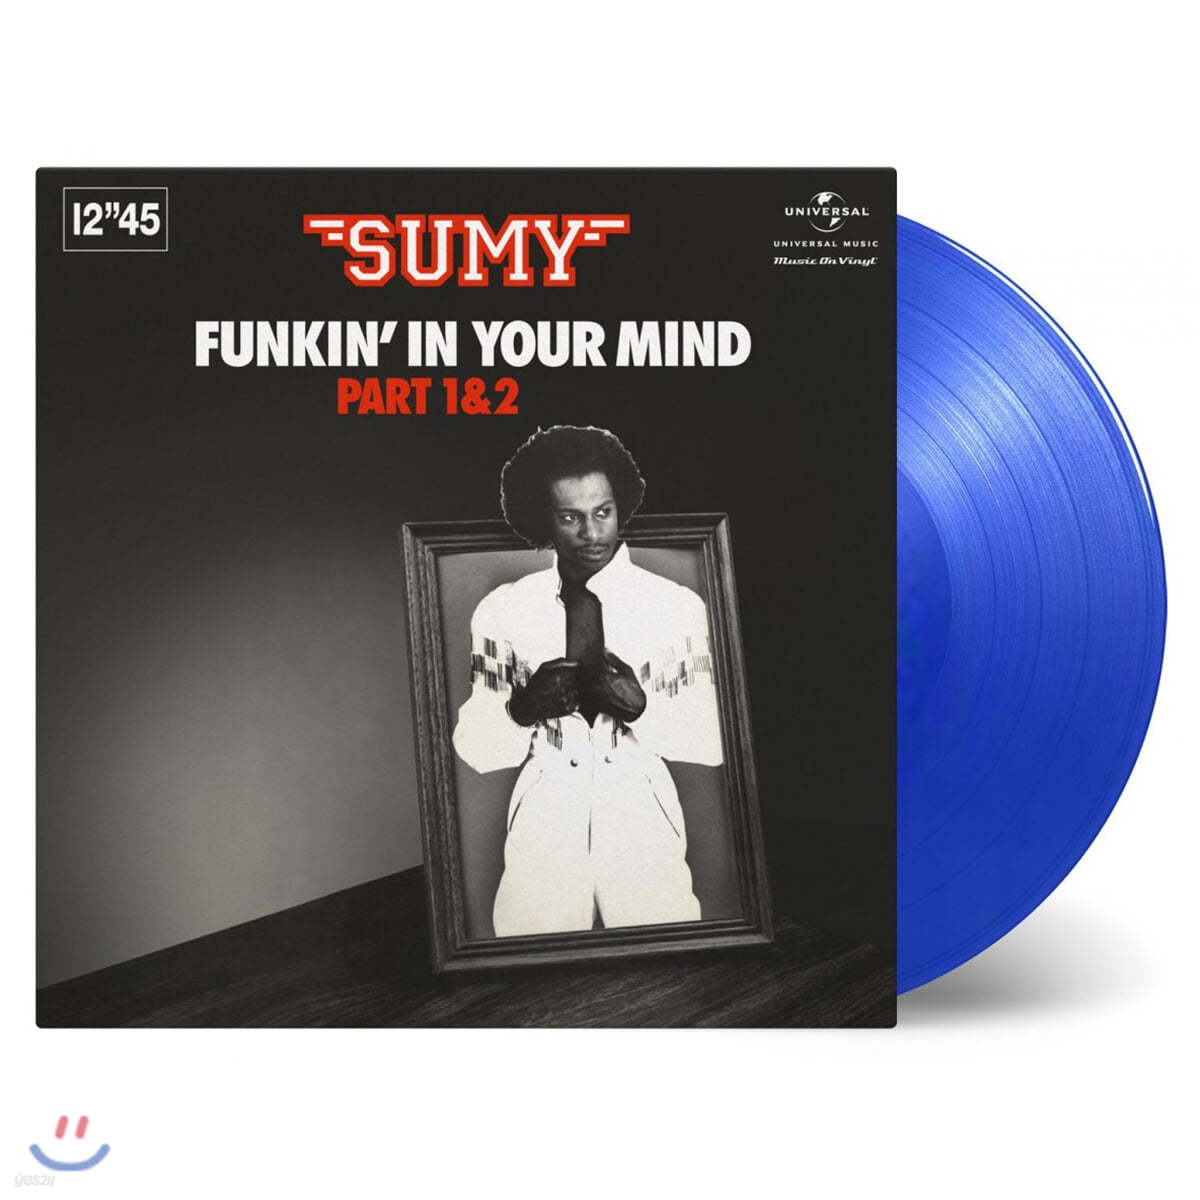 Sumy - Funkin' in your mind [투명 블루 컬러 LP]